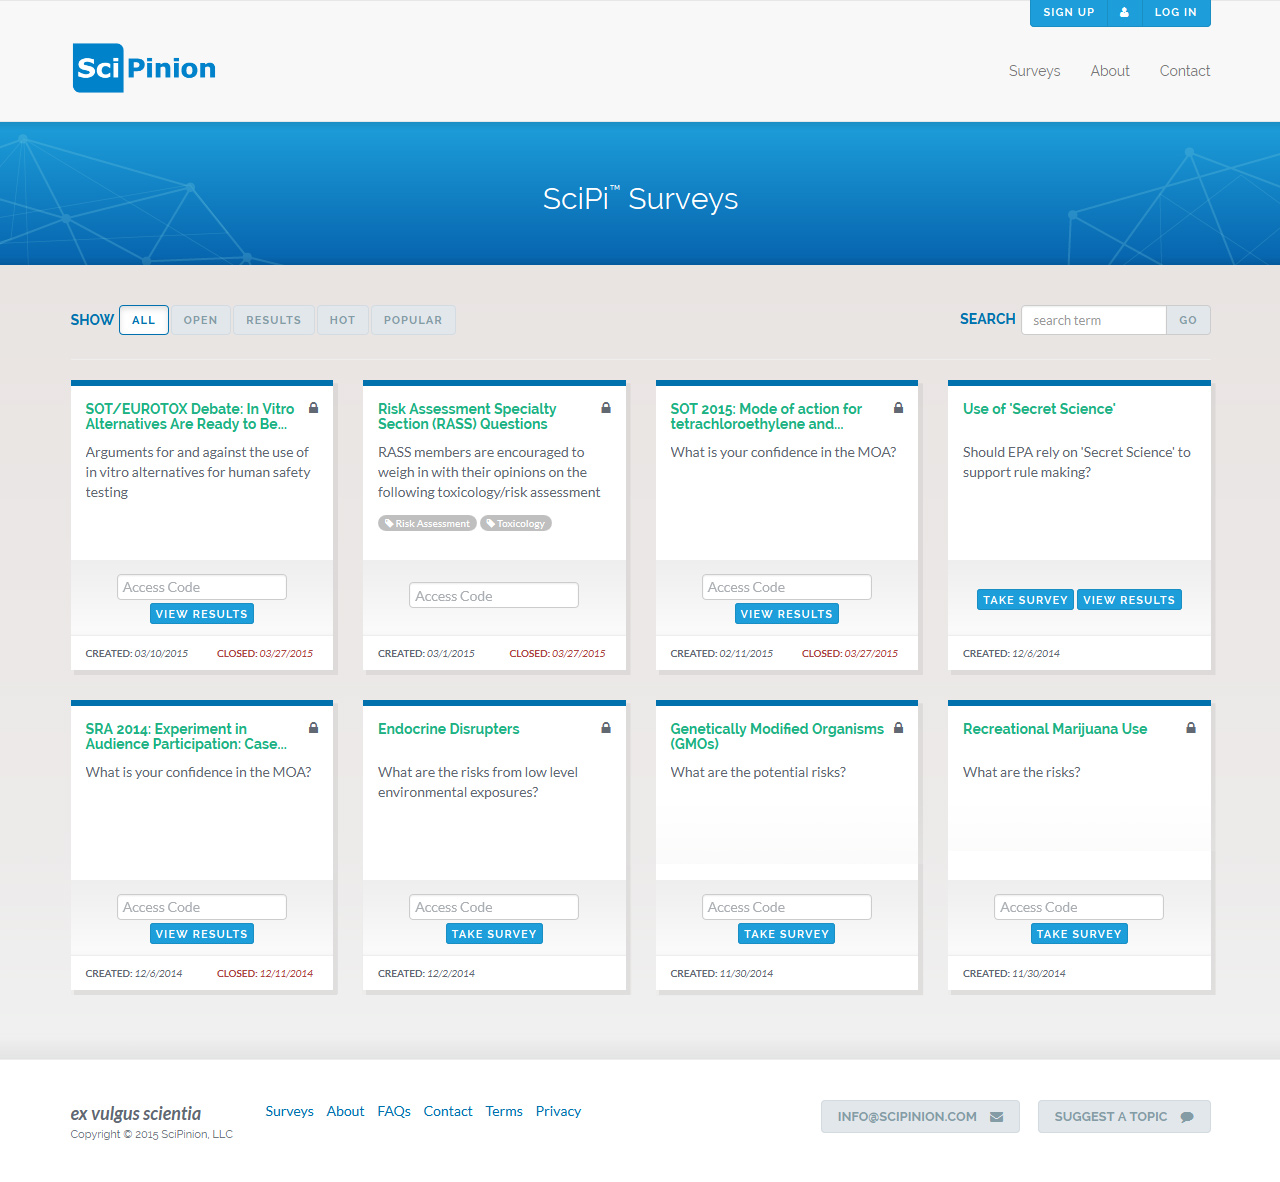 Directory for browsing, sorting, and creating surveys 